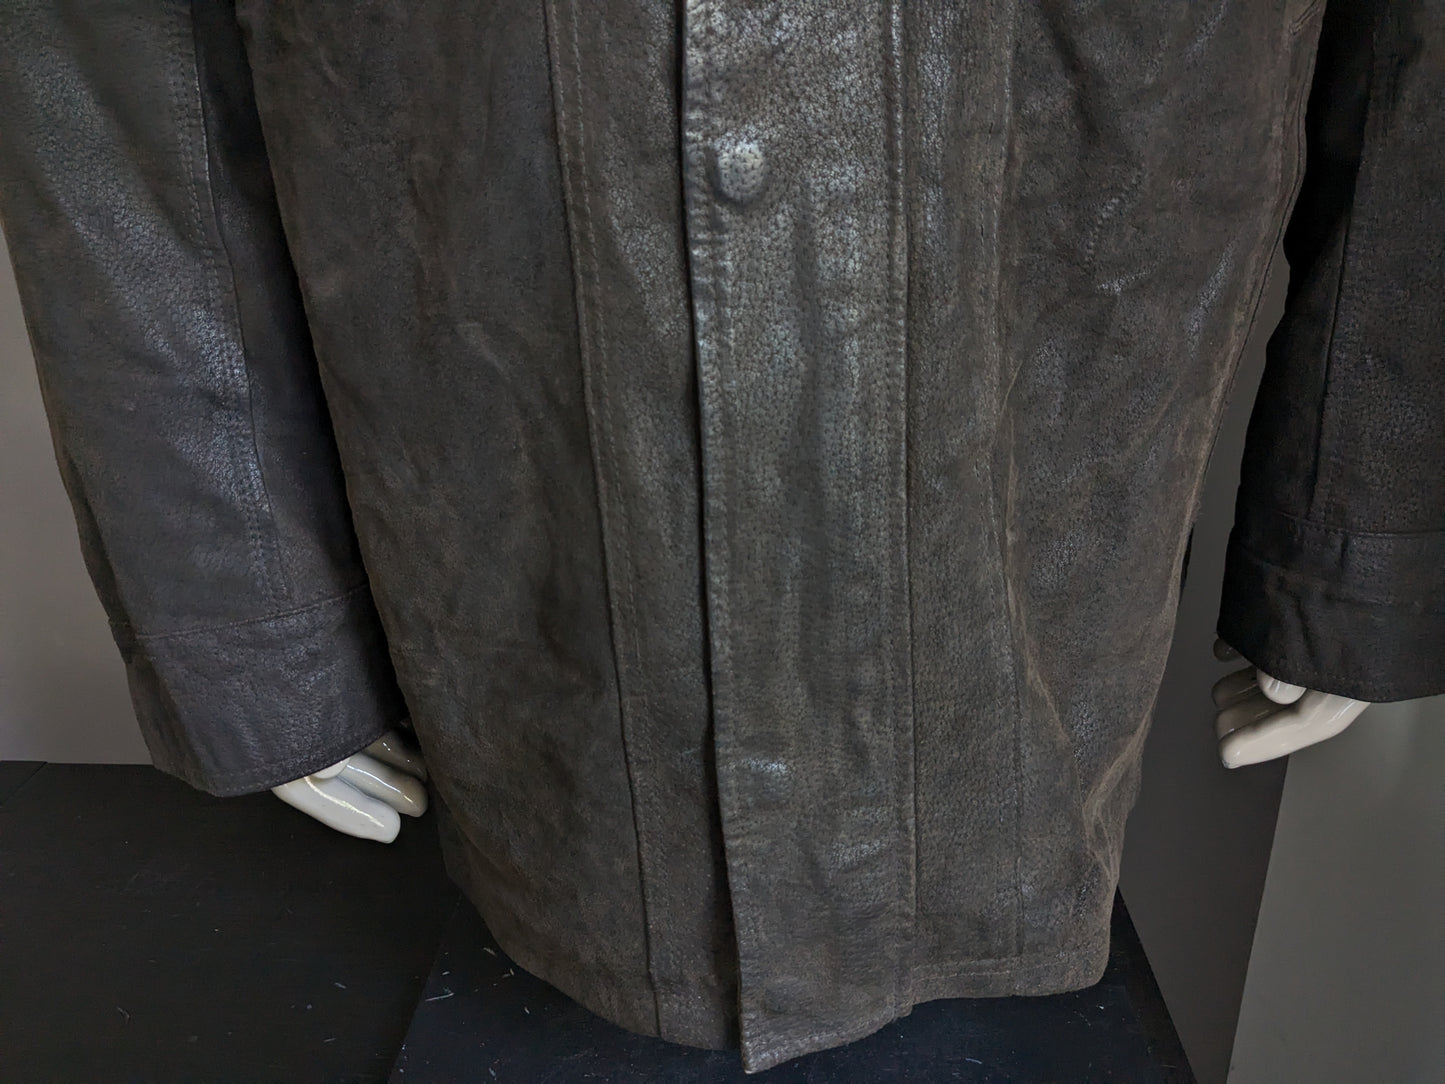 Leather style semi -long leather jacket. Dark brown colored. With detachable double closure and collar. Size 62-64/ 3XL.